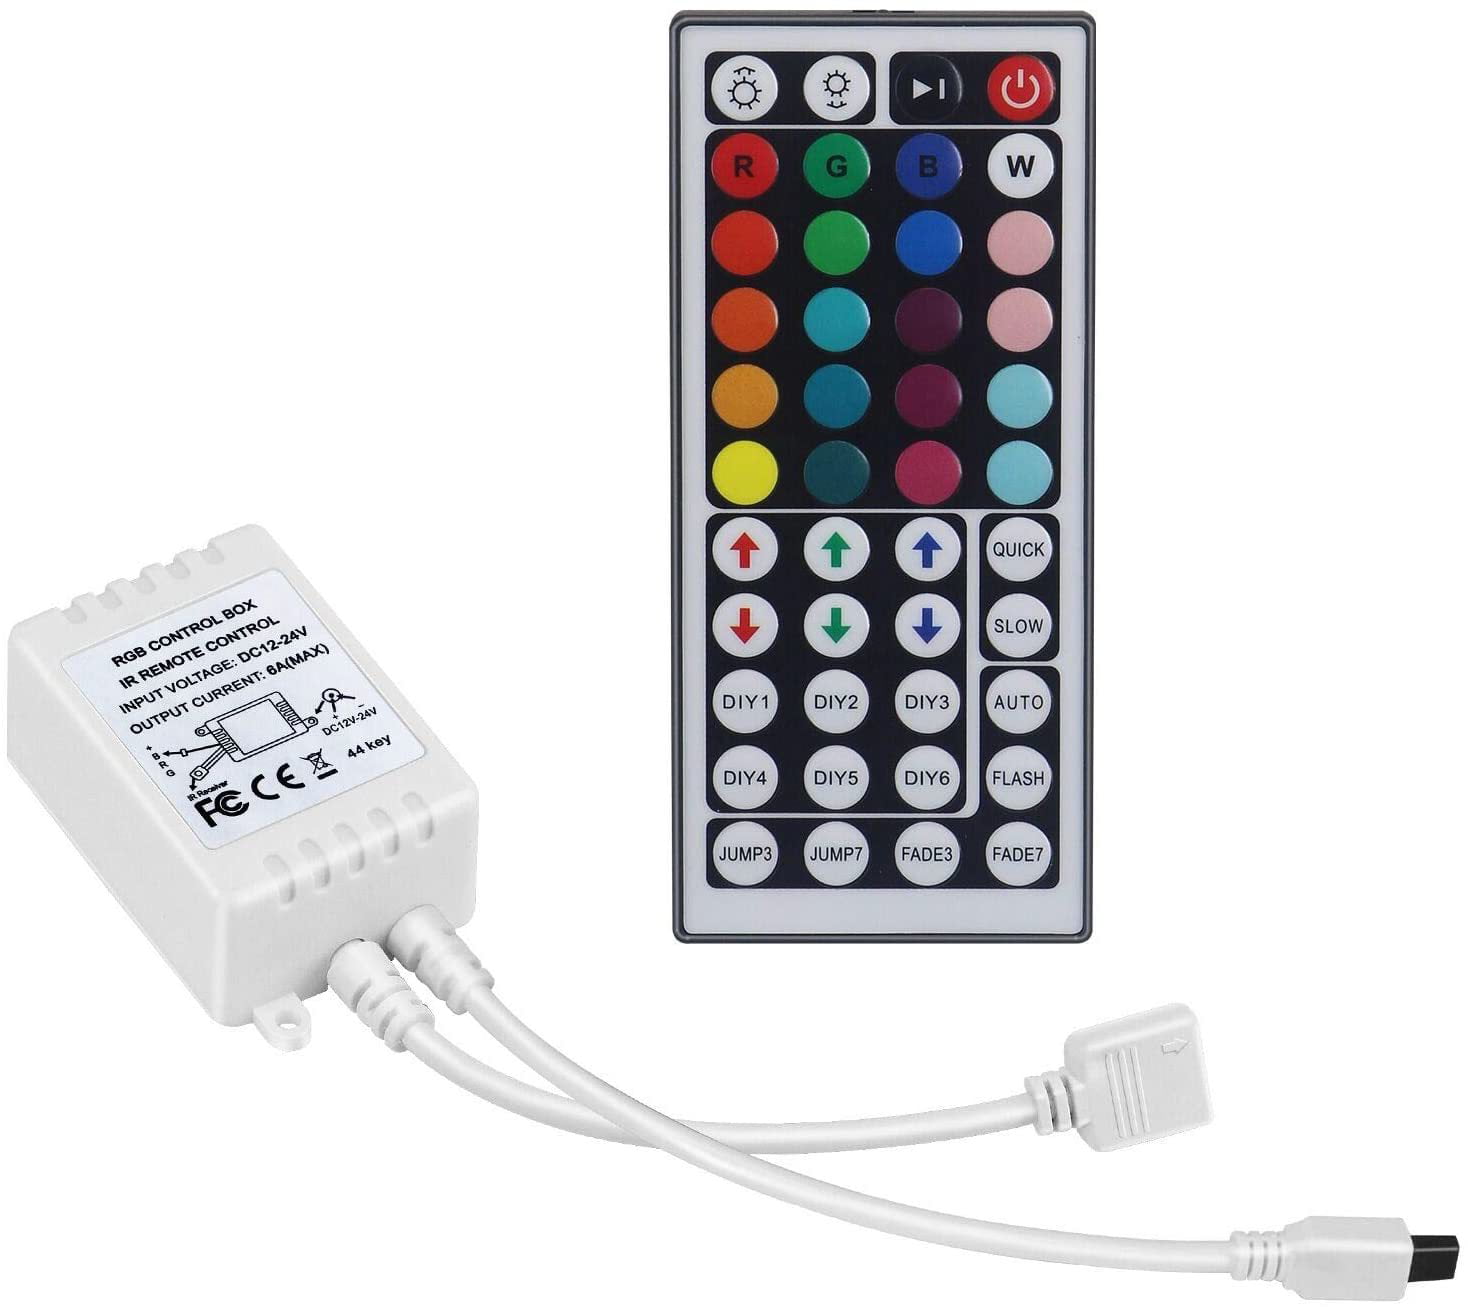 LED Strip Light controller 44 Key IR Infrared Wireless Remote with IR Receiver 